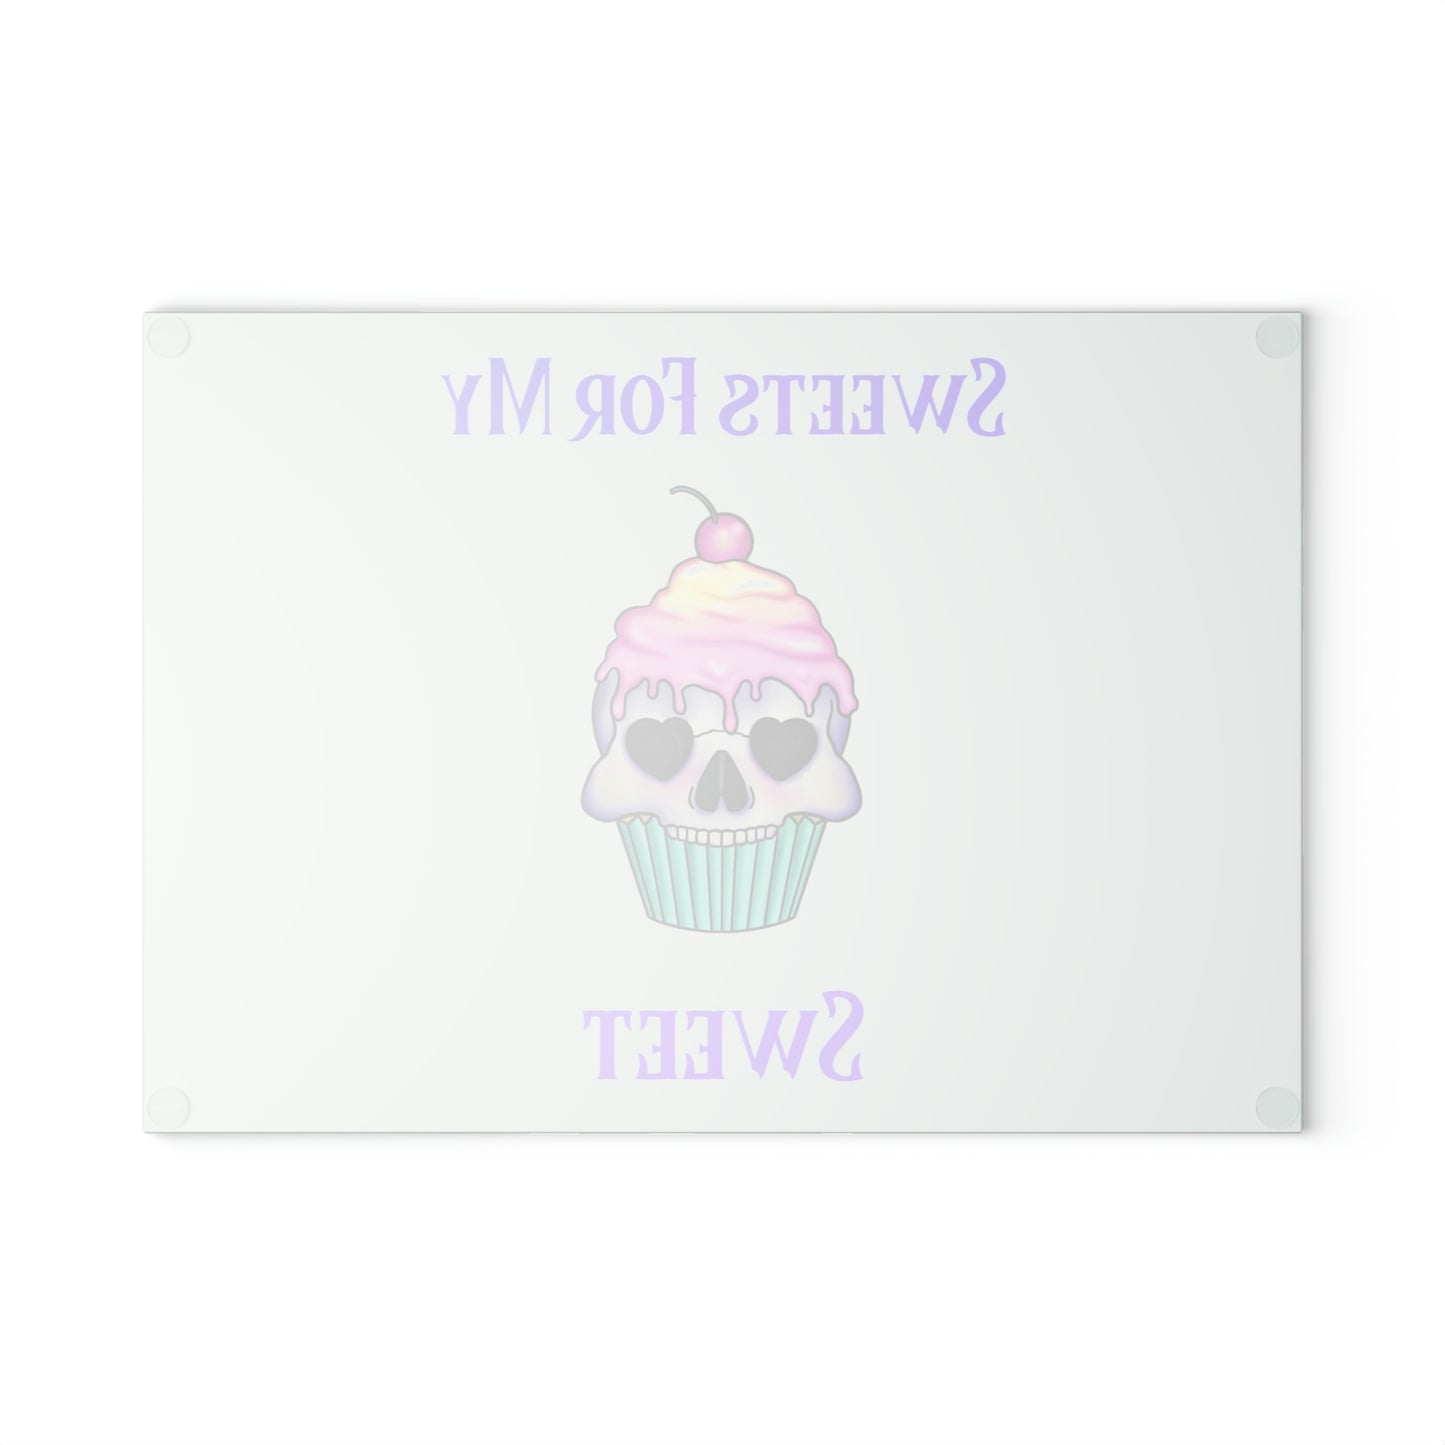 Sweets Glass Cutting Board - Witchy Kitchens